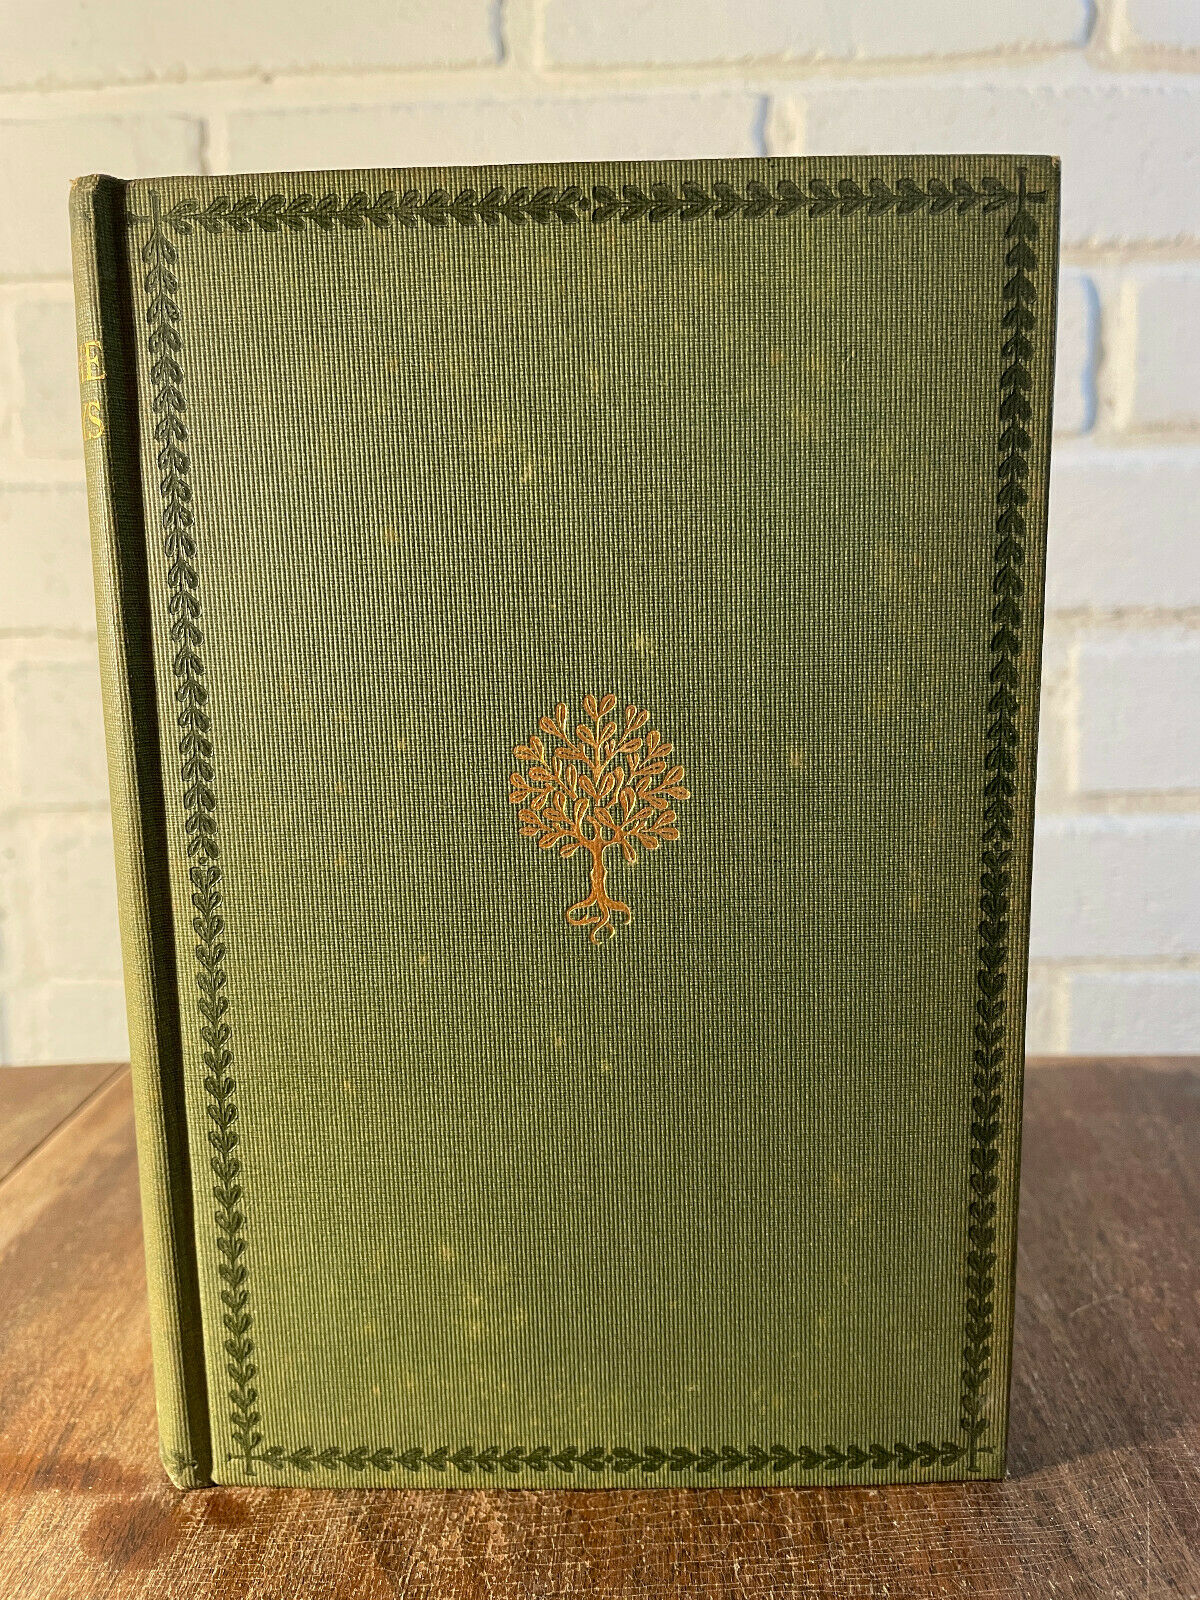 Diana of the Crossways by George Meredith. 1901 Revised Edition (W3)